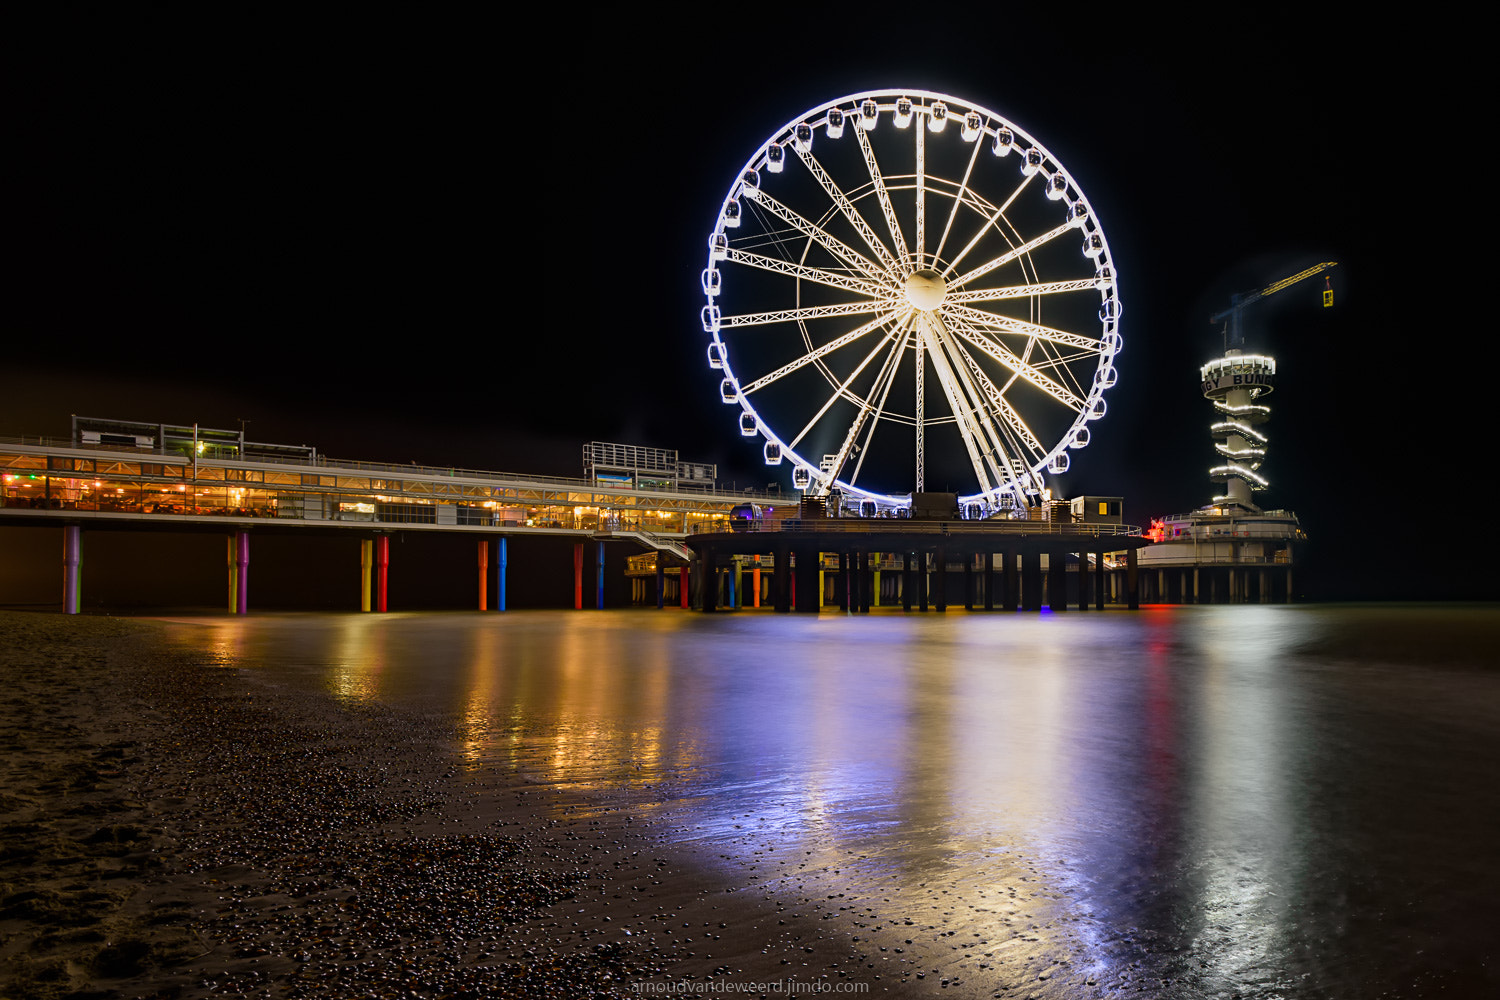 Nikon D7200 + Tamron SP AF 10-24mm F3.5-4.5 Di II LD Aspherical (IF) sample photo. The ferrywheel photography